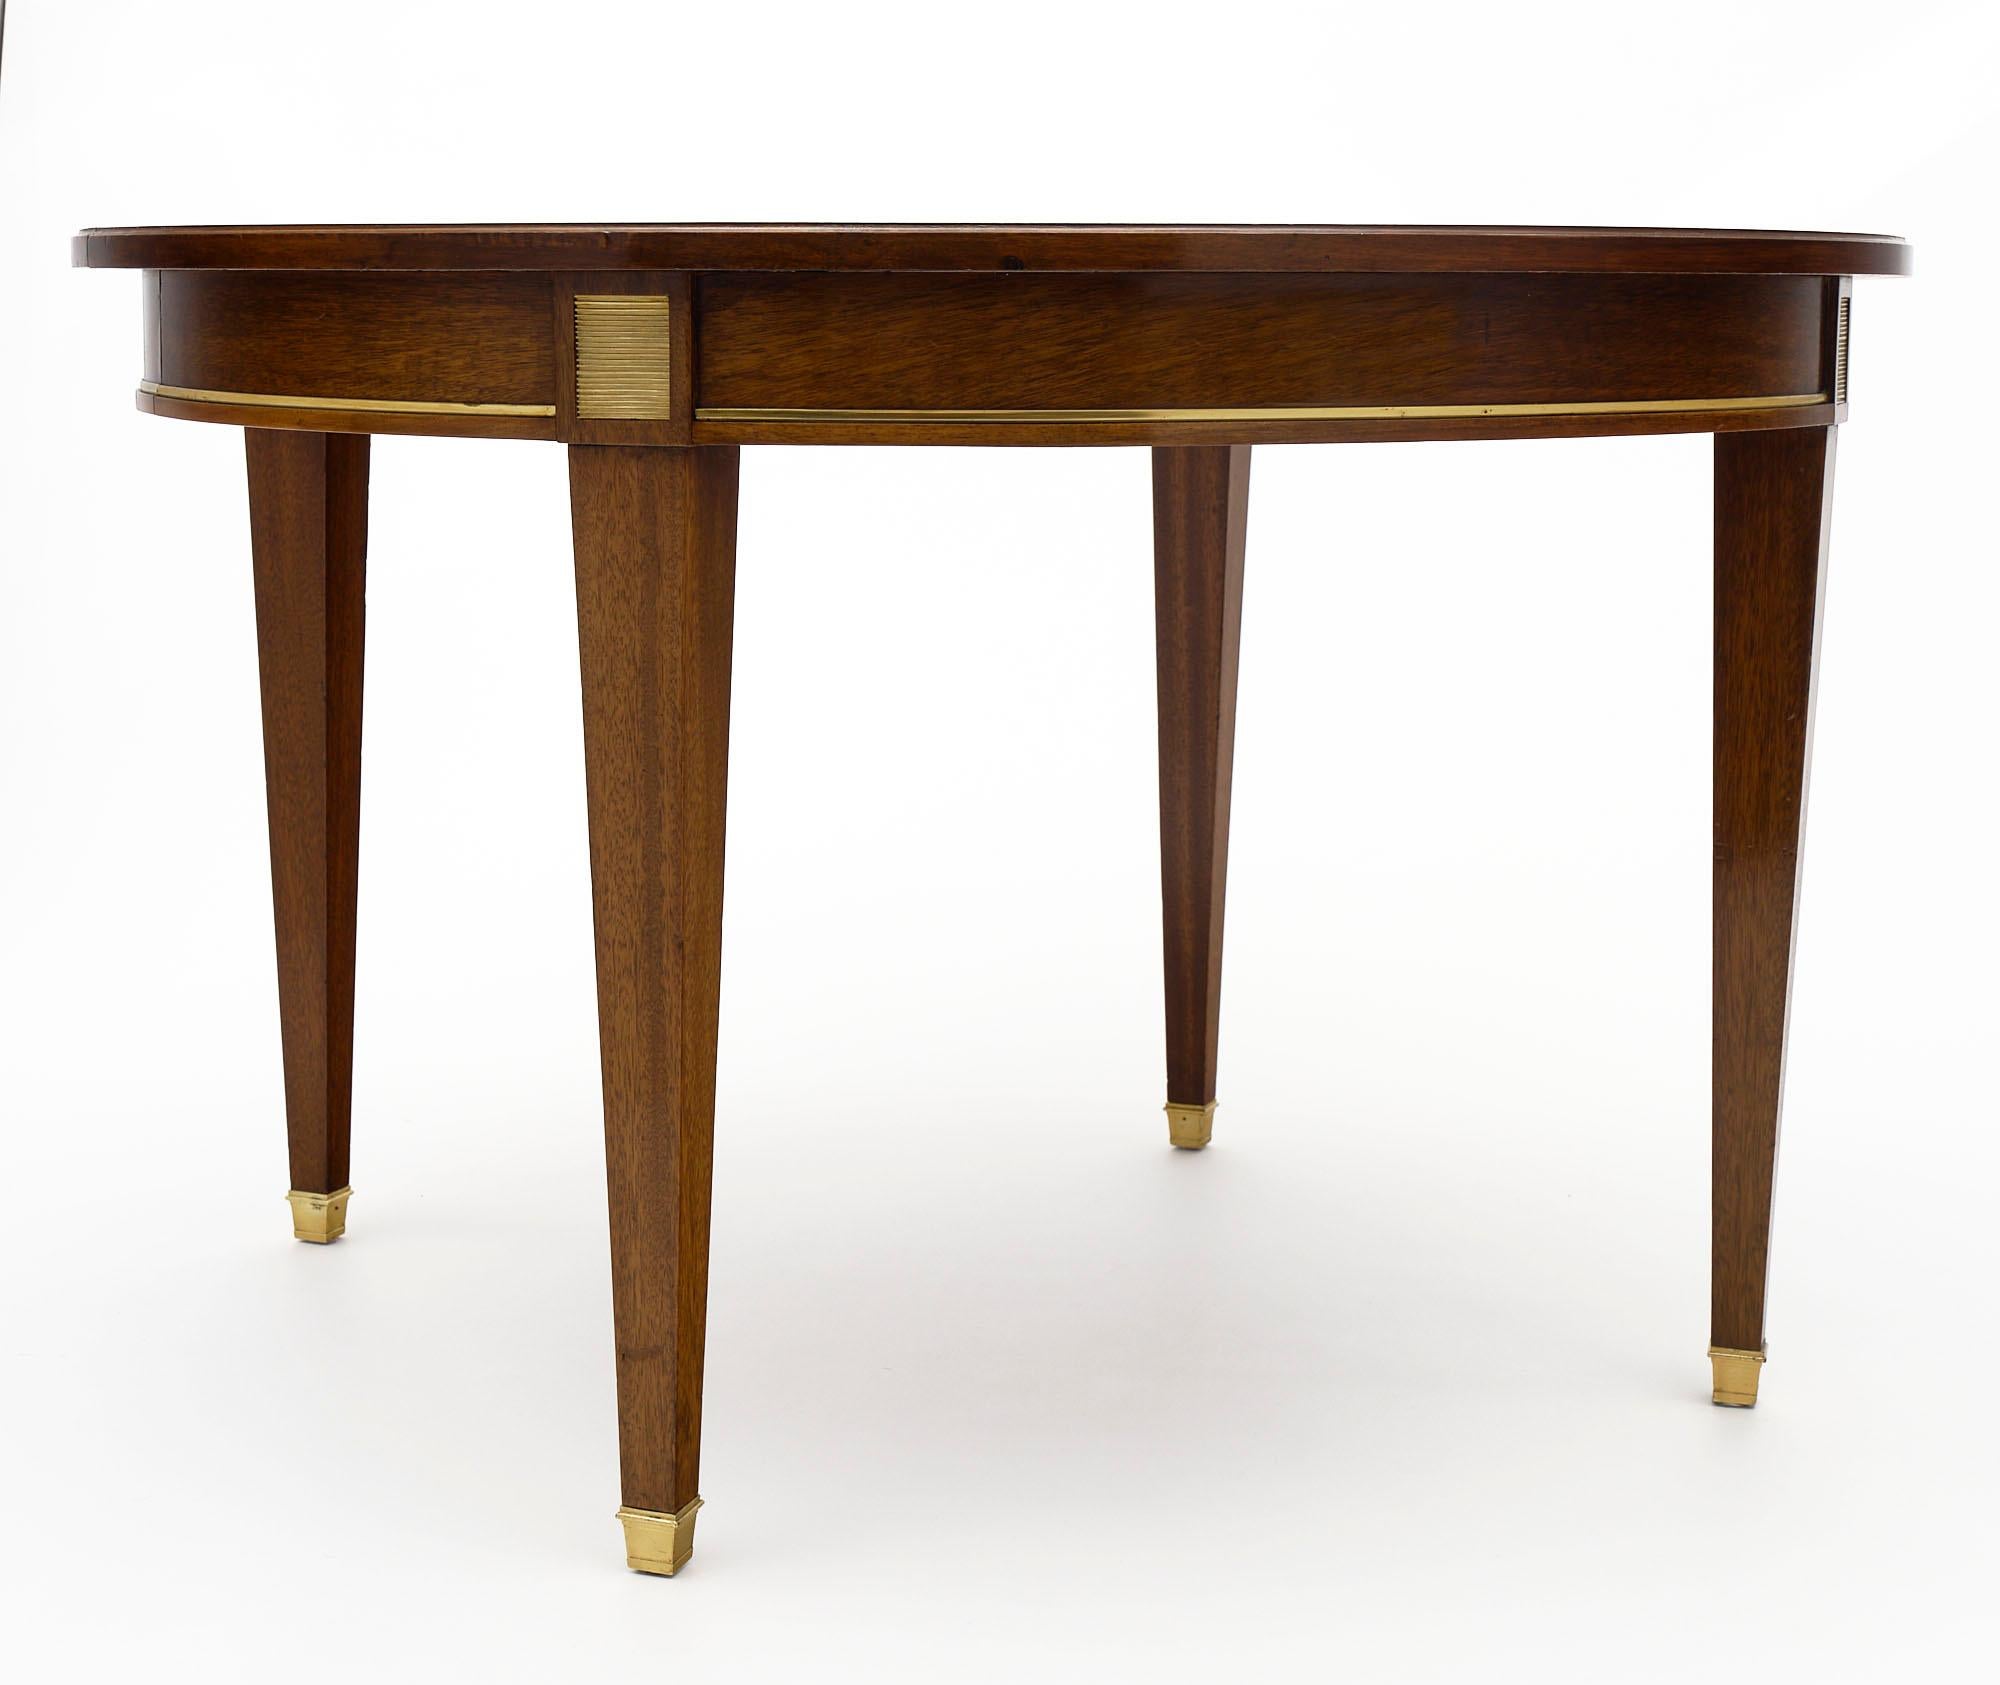 Dining table in the French Directoire style made of walnut featuring brass trim around the apron and above the tapered legs. The table could open for leaves; though we do not have the leaves available at this time. The feet are all capped with brass.